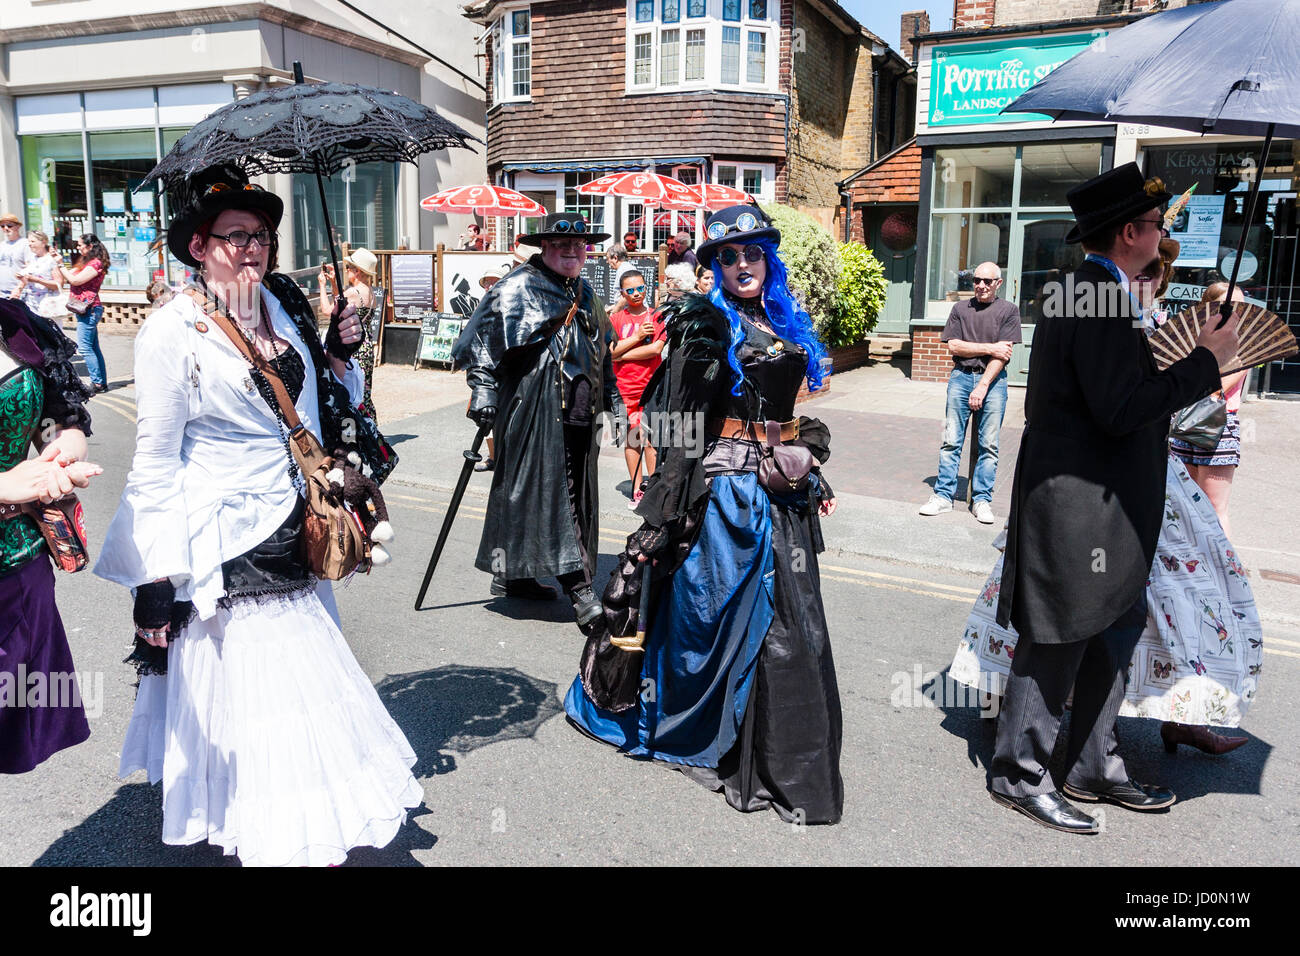 Steampunks marching along street as part of a parade. One, young woman in black and blue gothic type dress, turns to look at viewer as they walk past. Others holding black umbrellas as sunshades. Stock Photo